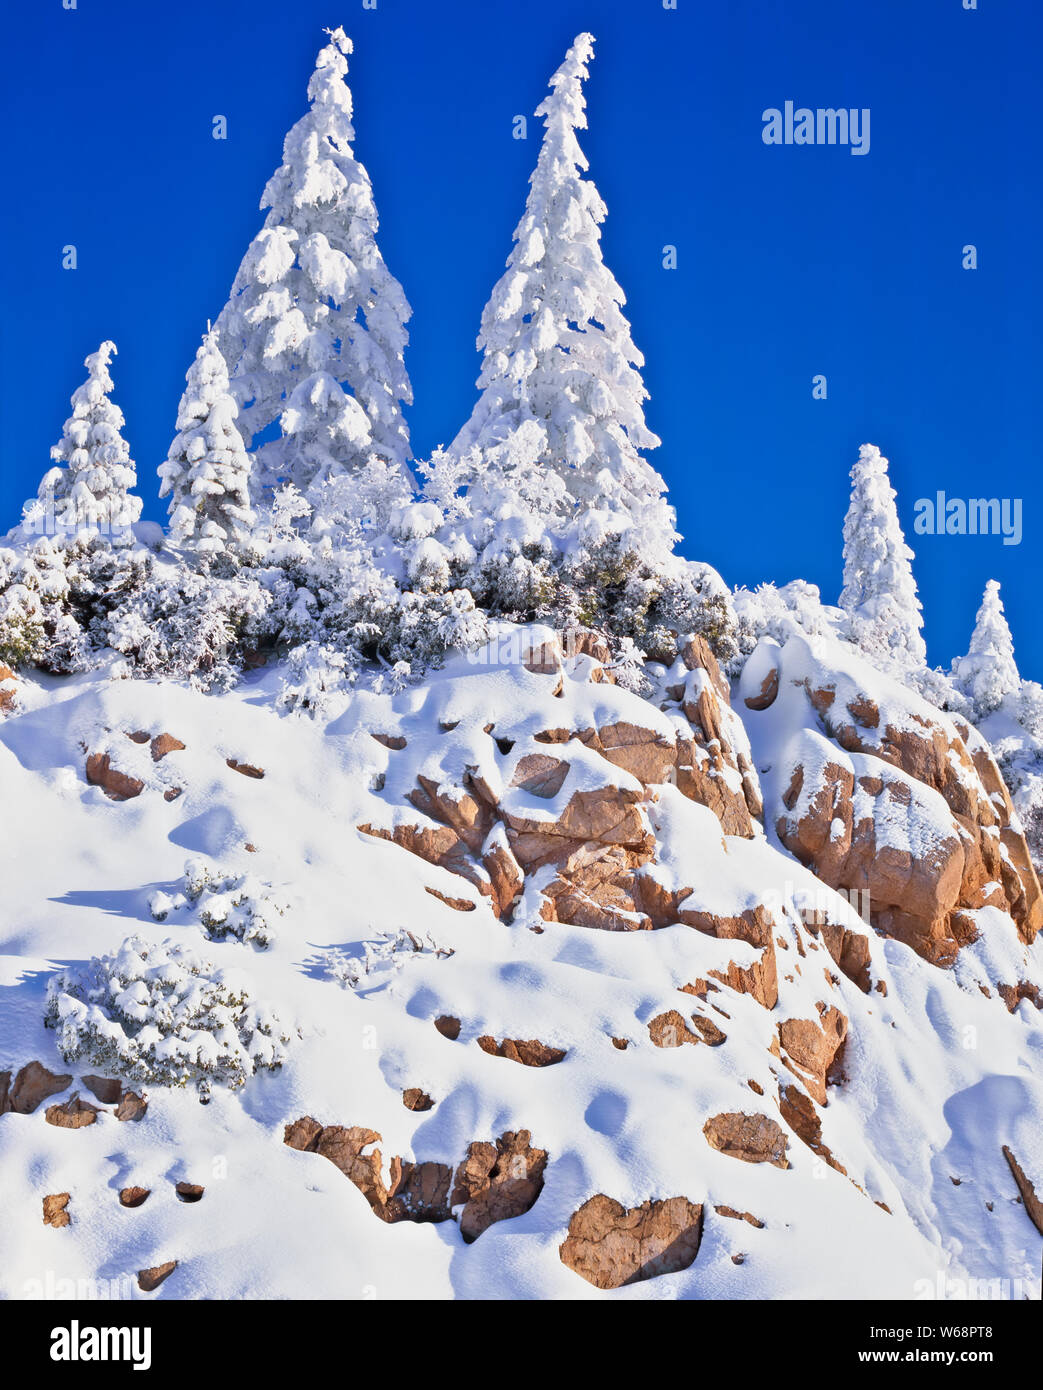 Overnight snowfall creates a winter wonderland among the rocky cliffs and trees in southern Oregon's Rogue River National Forest. Stock Photo